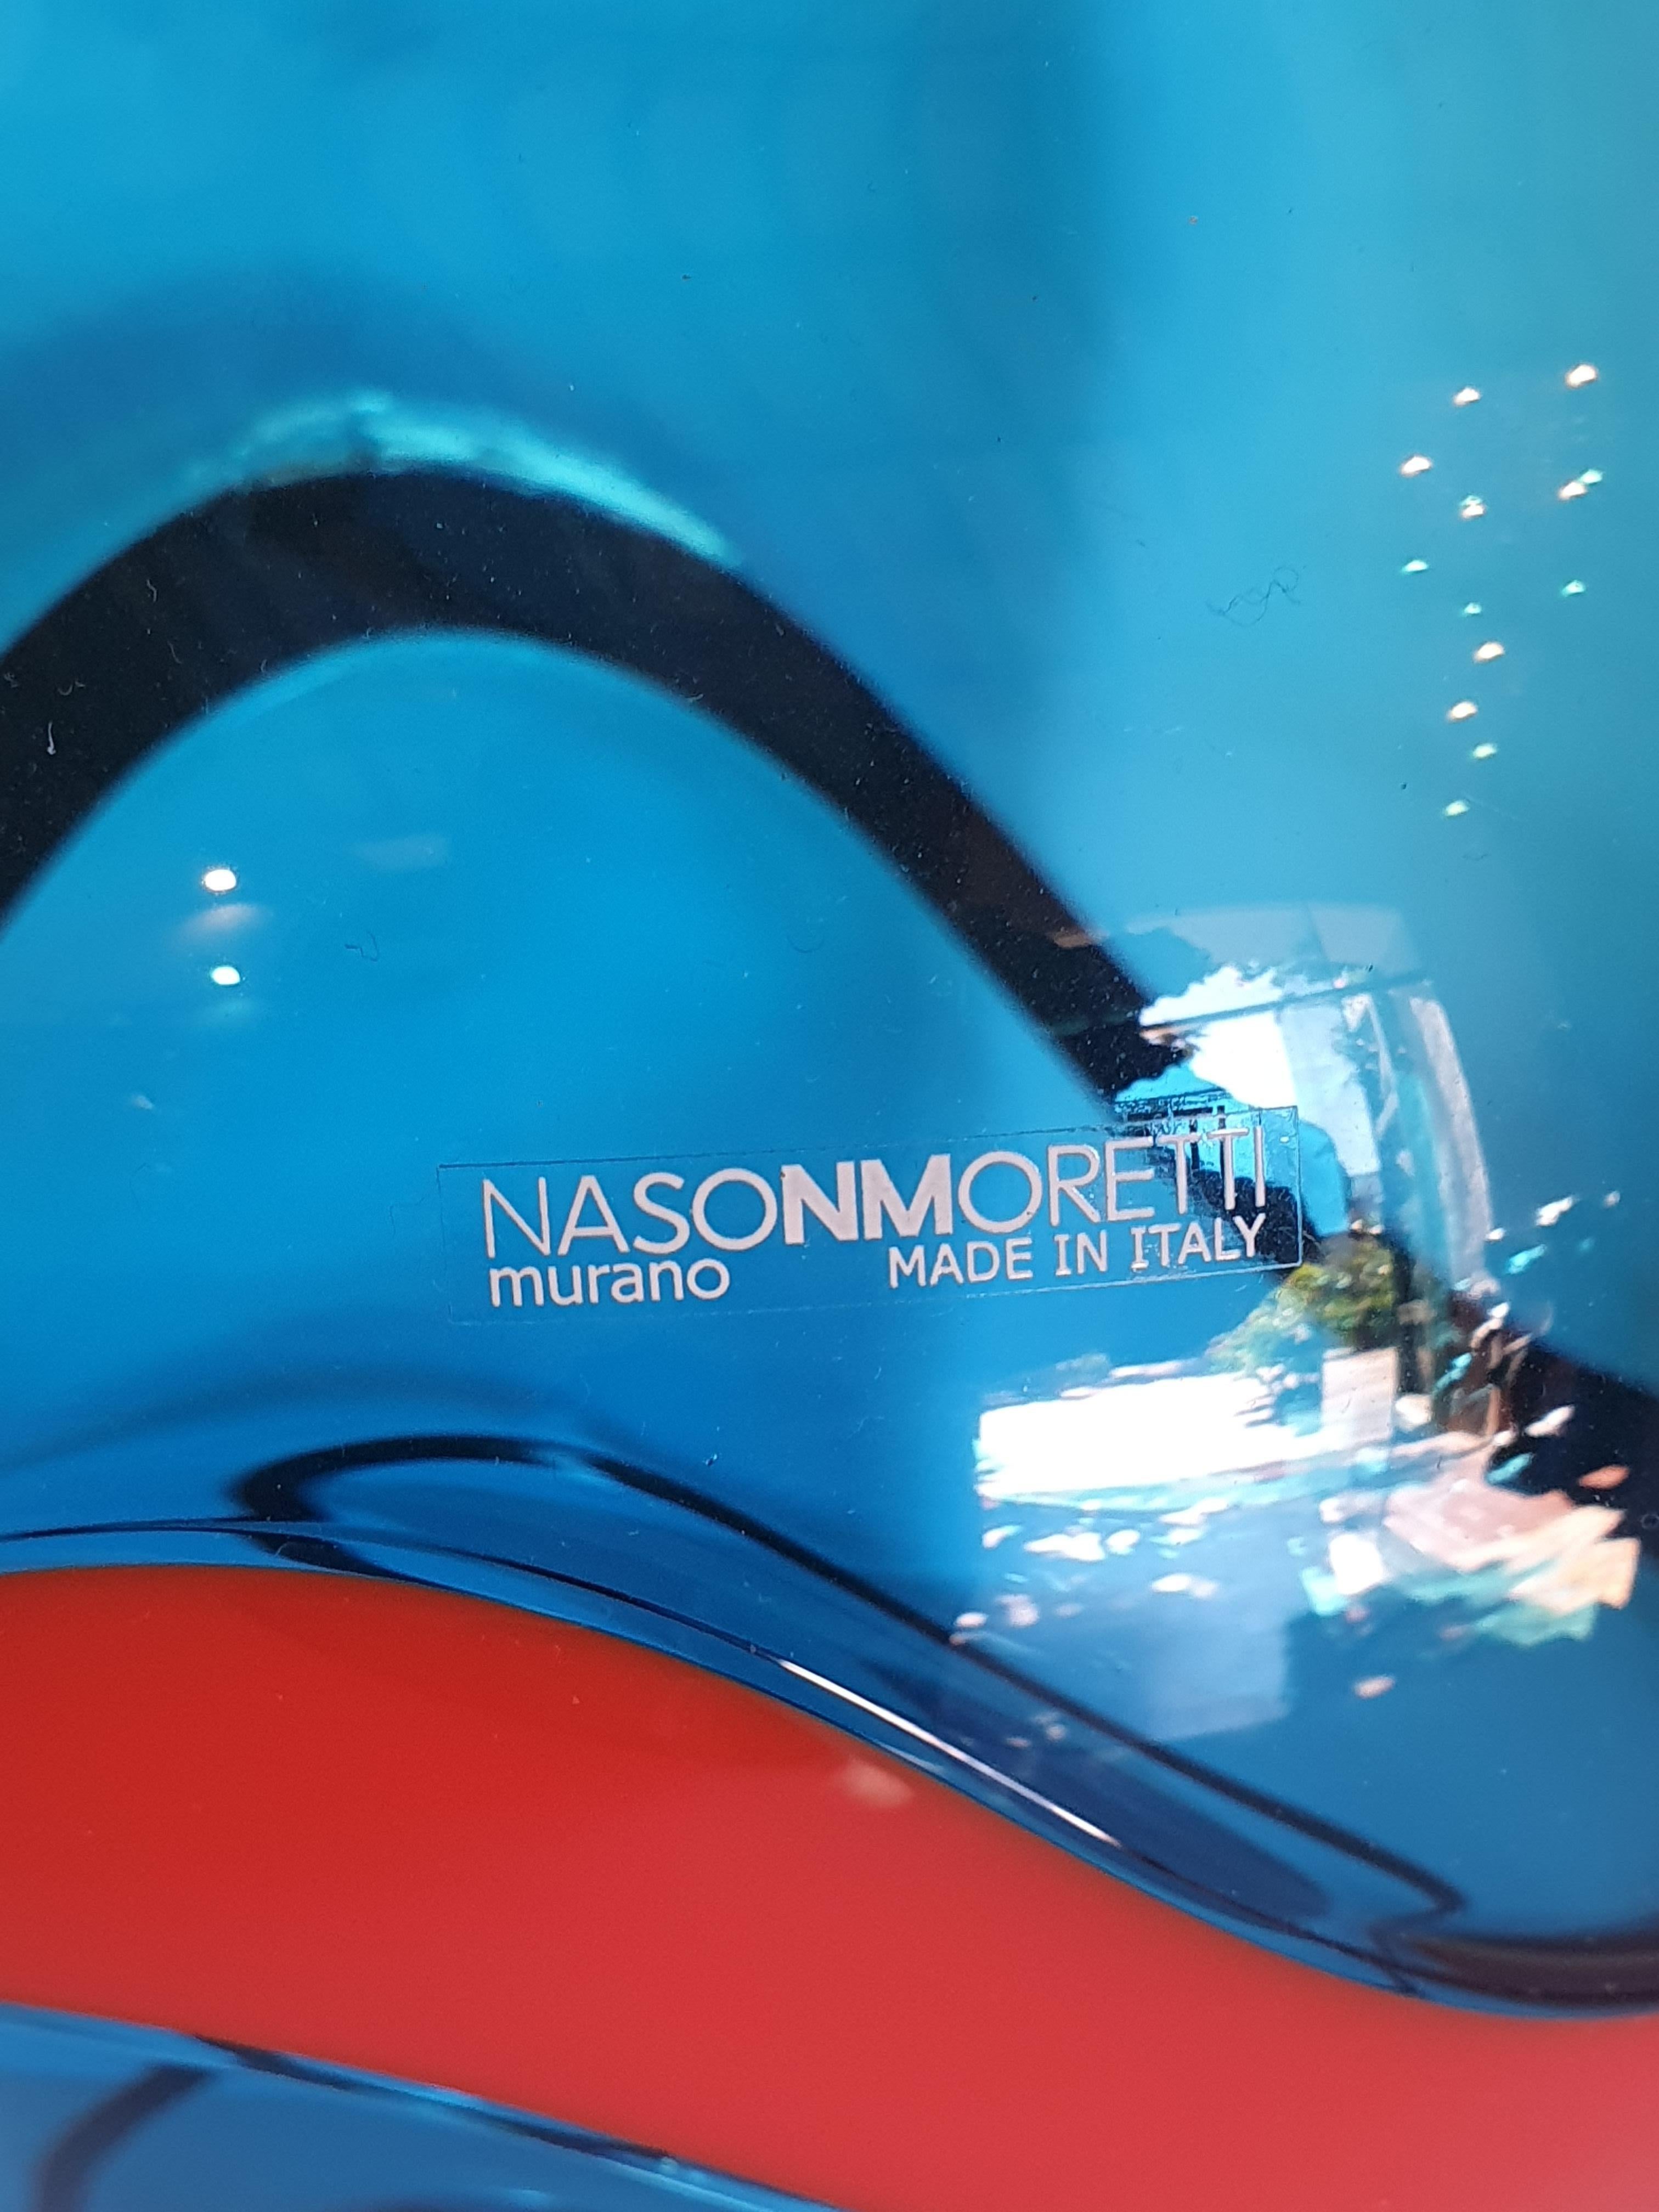 In coral and aquamarine colors.
NasonMoretti, born in 1923, creates its products in a limited number, adressing those who are not easily pleased, those who love and search for value and elegance in everyday gestures and objects.
Each piece